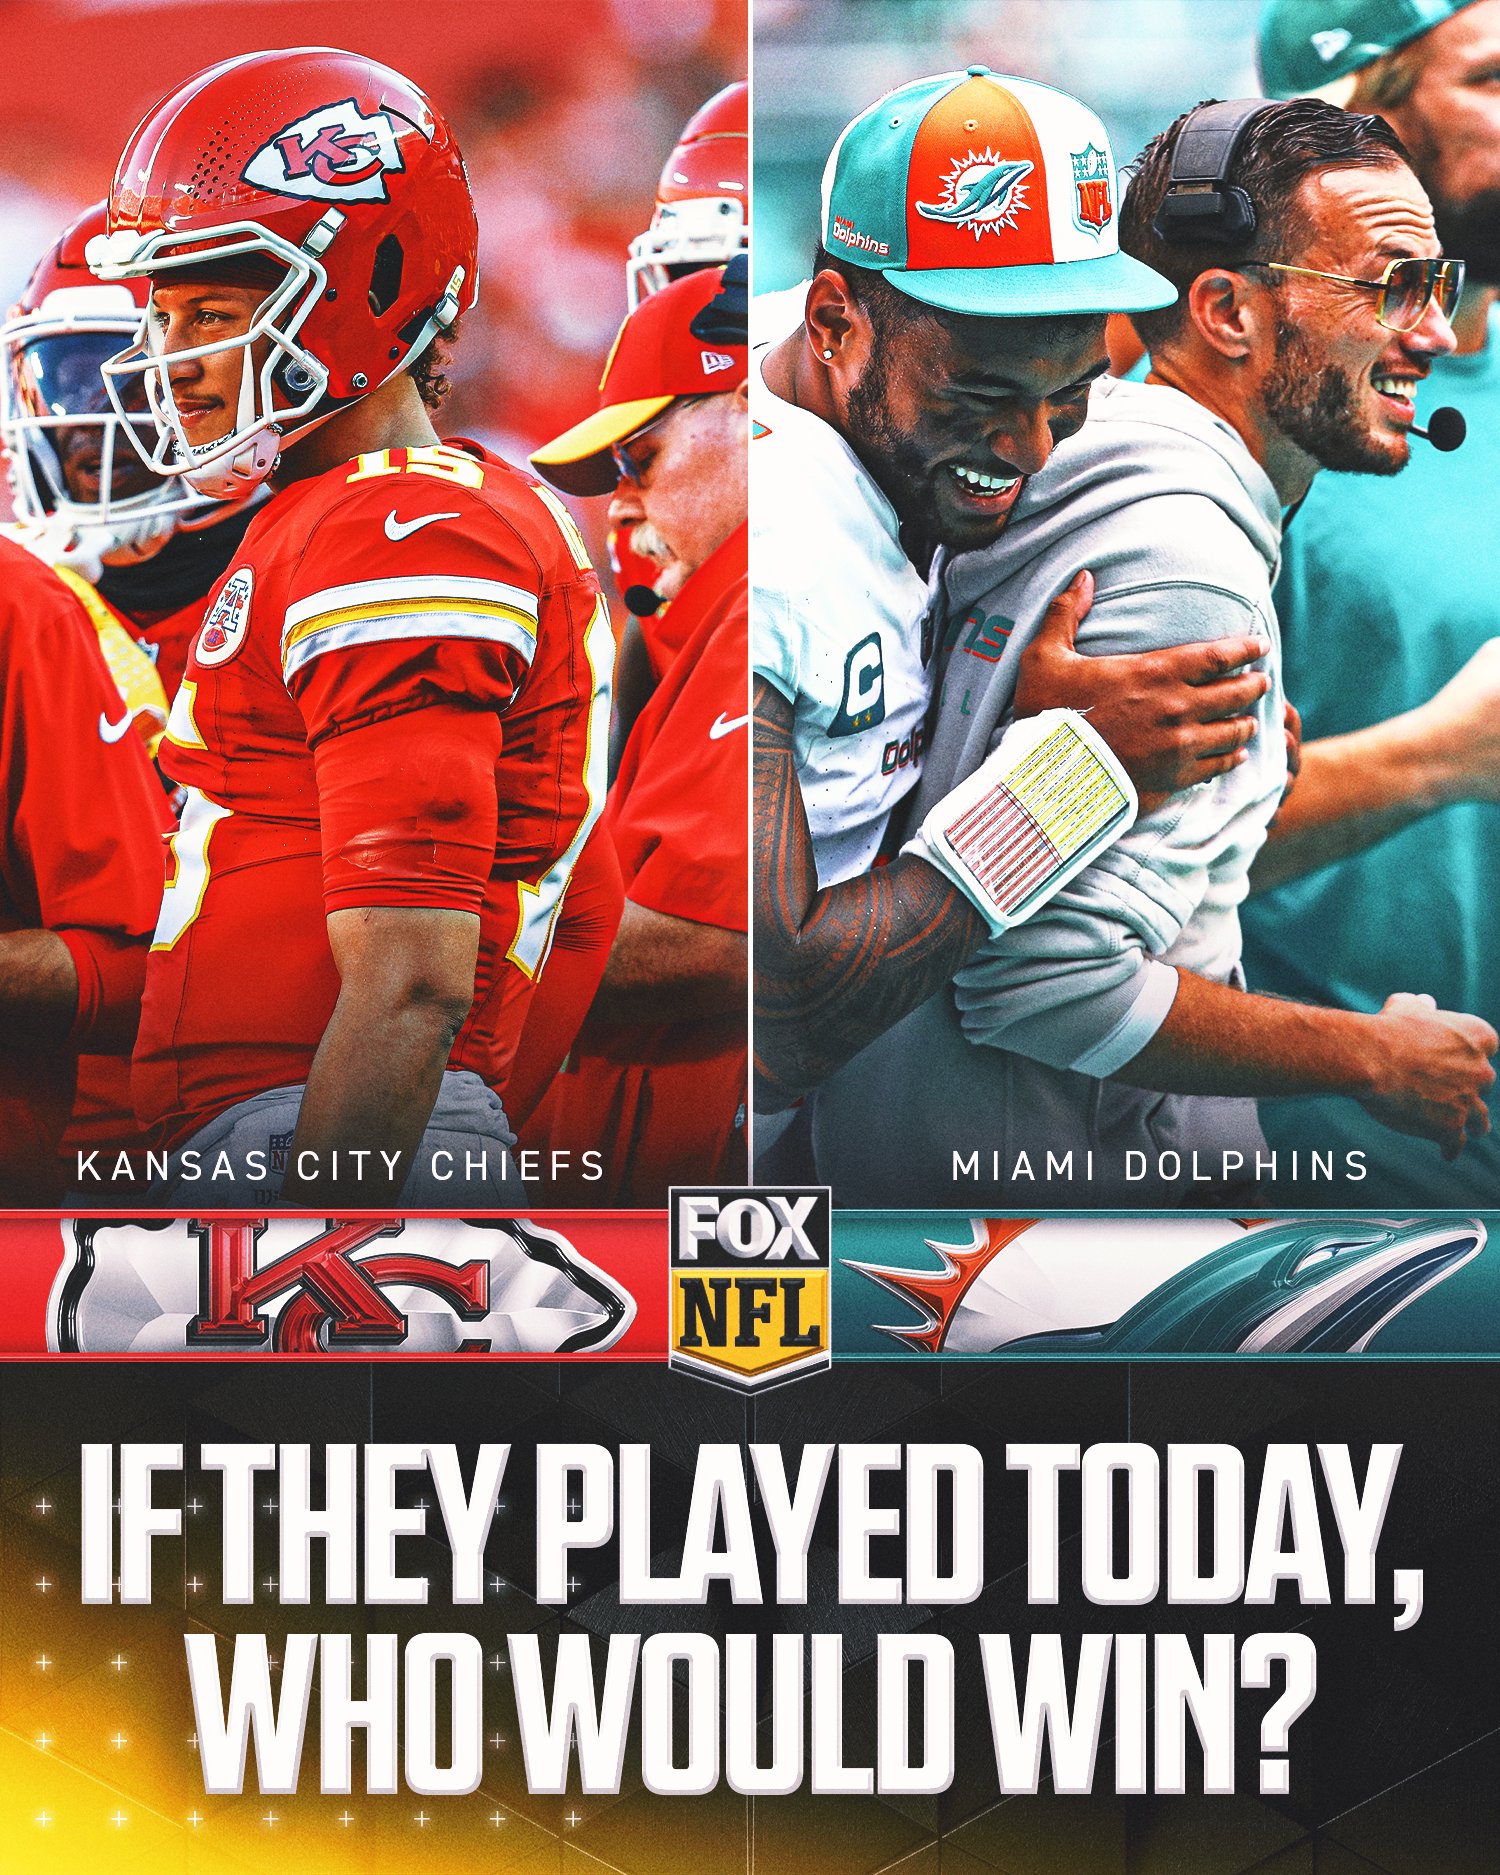 FOX Sports: NFL on X: Who would win if they played today? Kansas